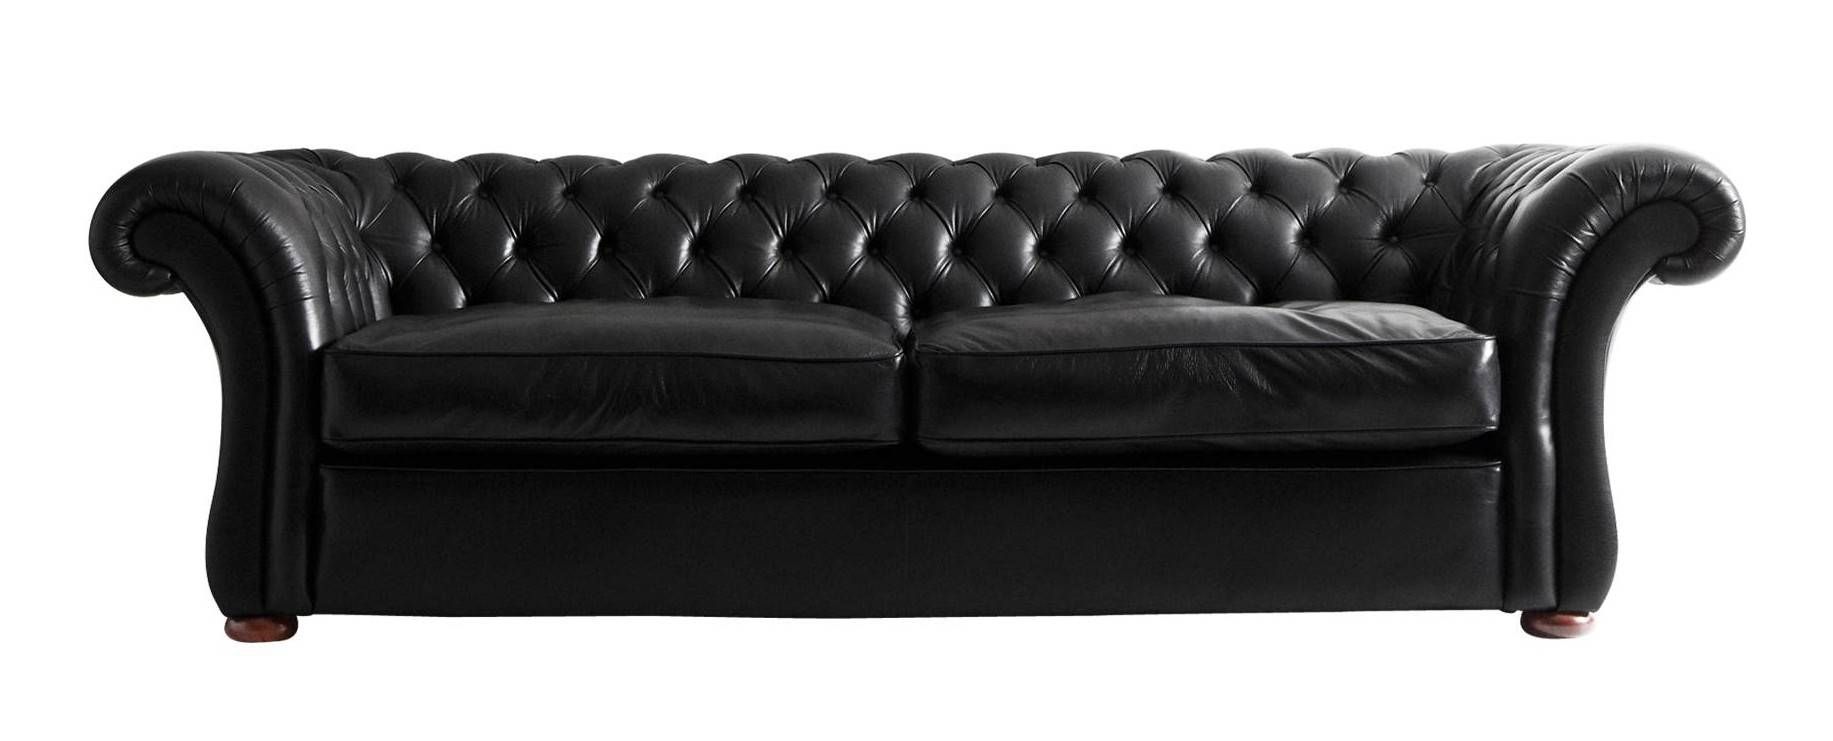 Furniture: Stunning Tufted White Leather Chesterfield Sofa As For Tufted Leather Chesterfield Sofas (View 16 of 30)